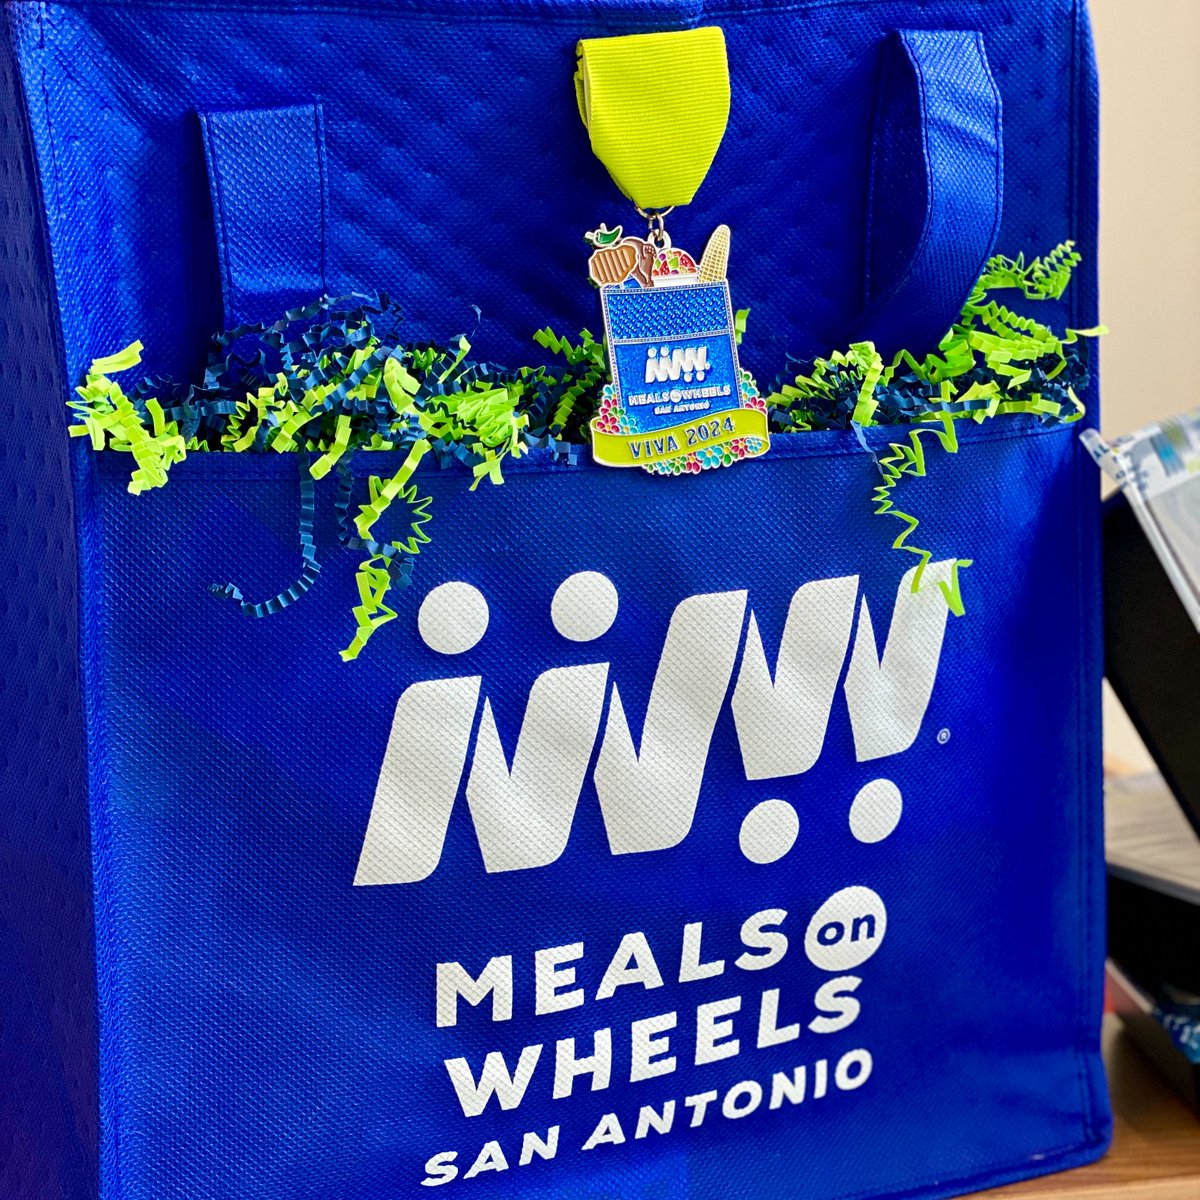 We are excited to release our 2024 Fiesta Medal! This year, the medal features our iconic blue Meals on Wheels bags! We are selling the medal for $14, the cost of two meals delivered to our older and disabled neighbors. Click the link to buy yours today: bit.ly/mowfiestamedal…